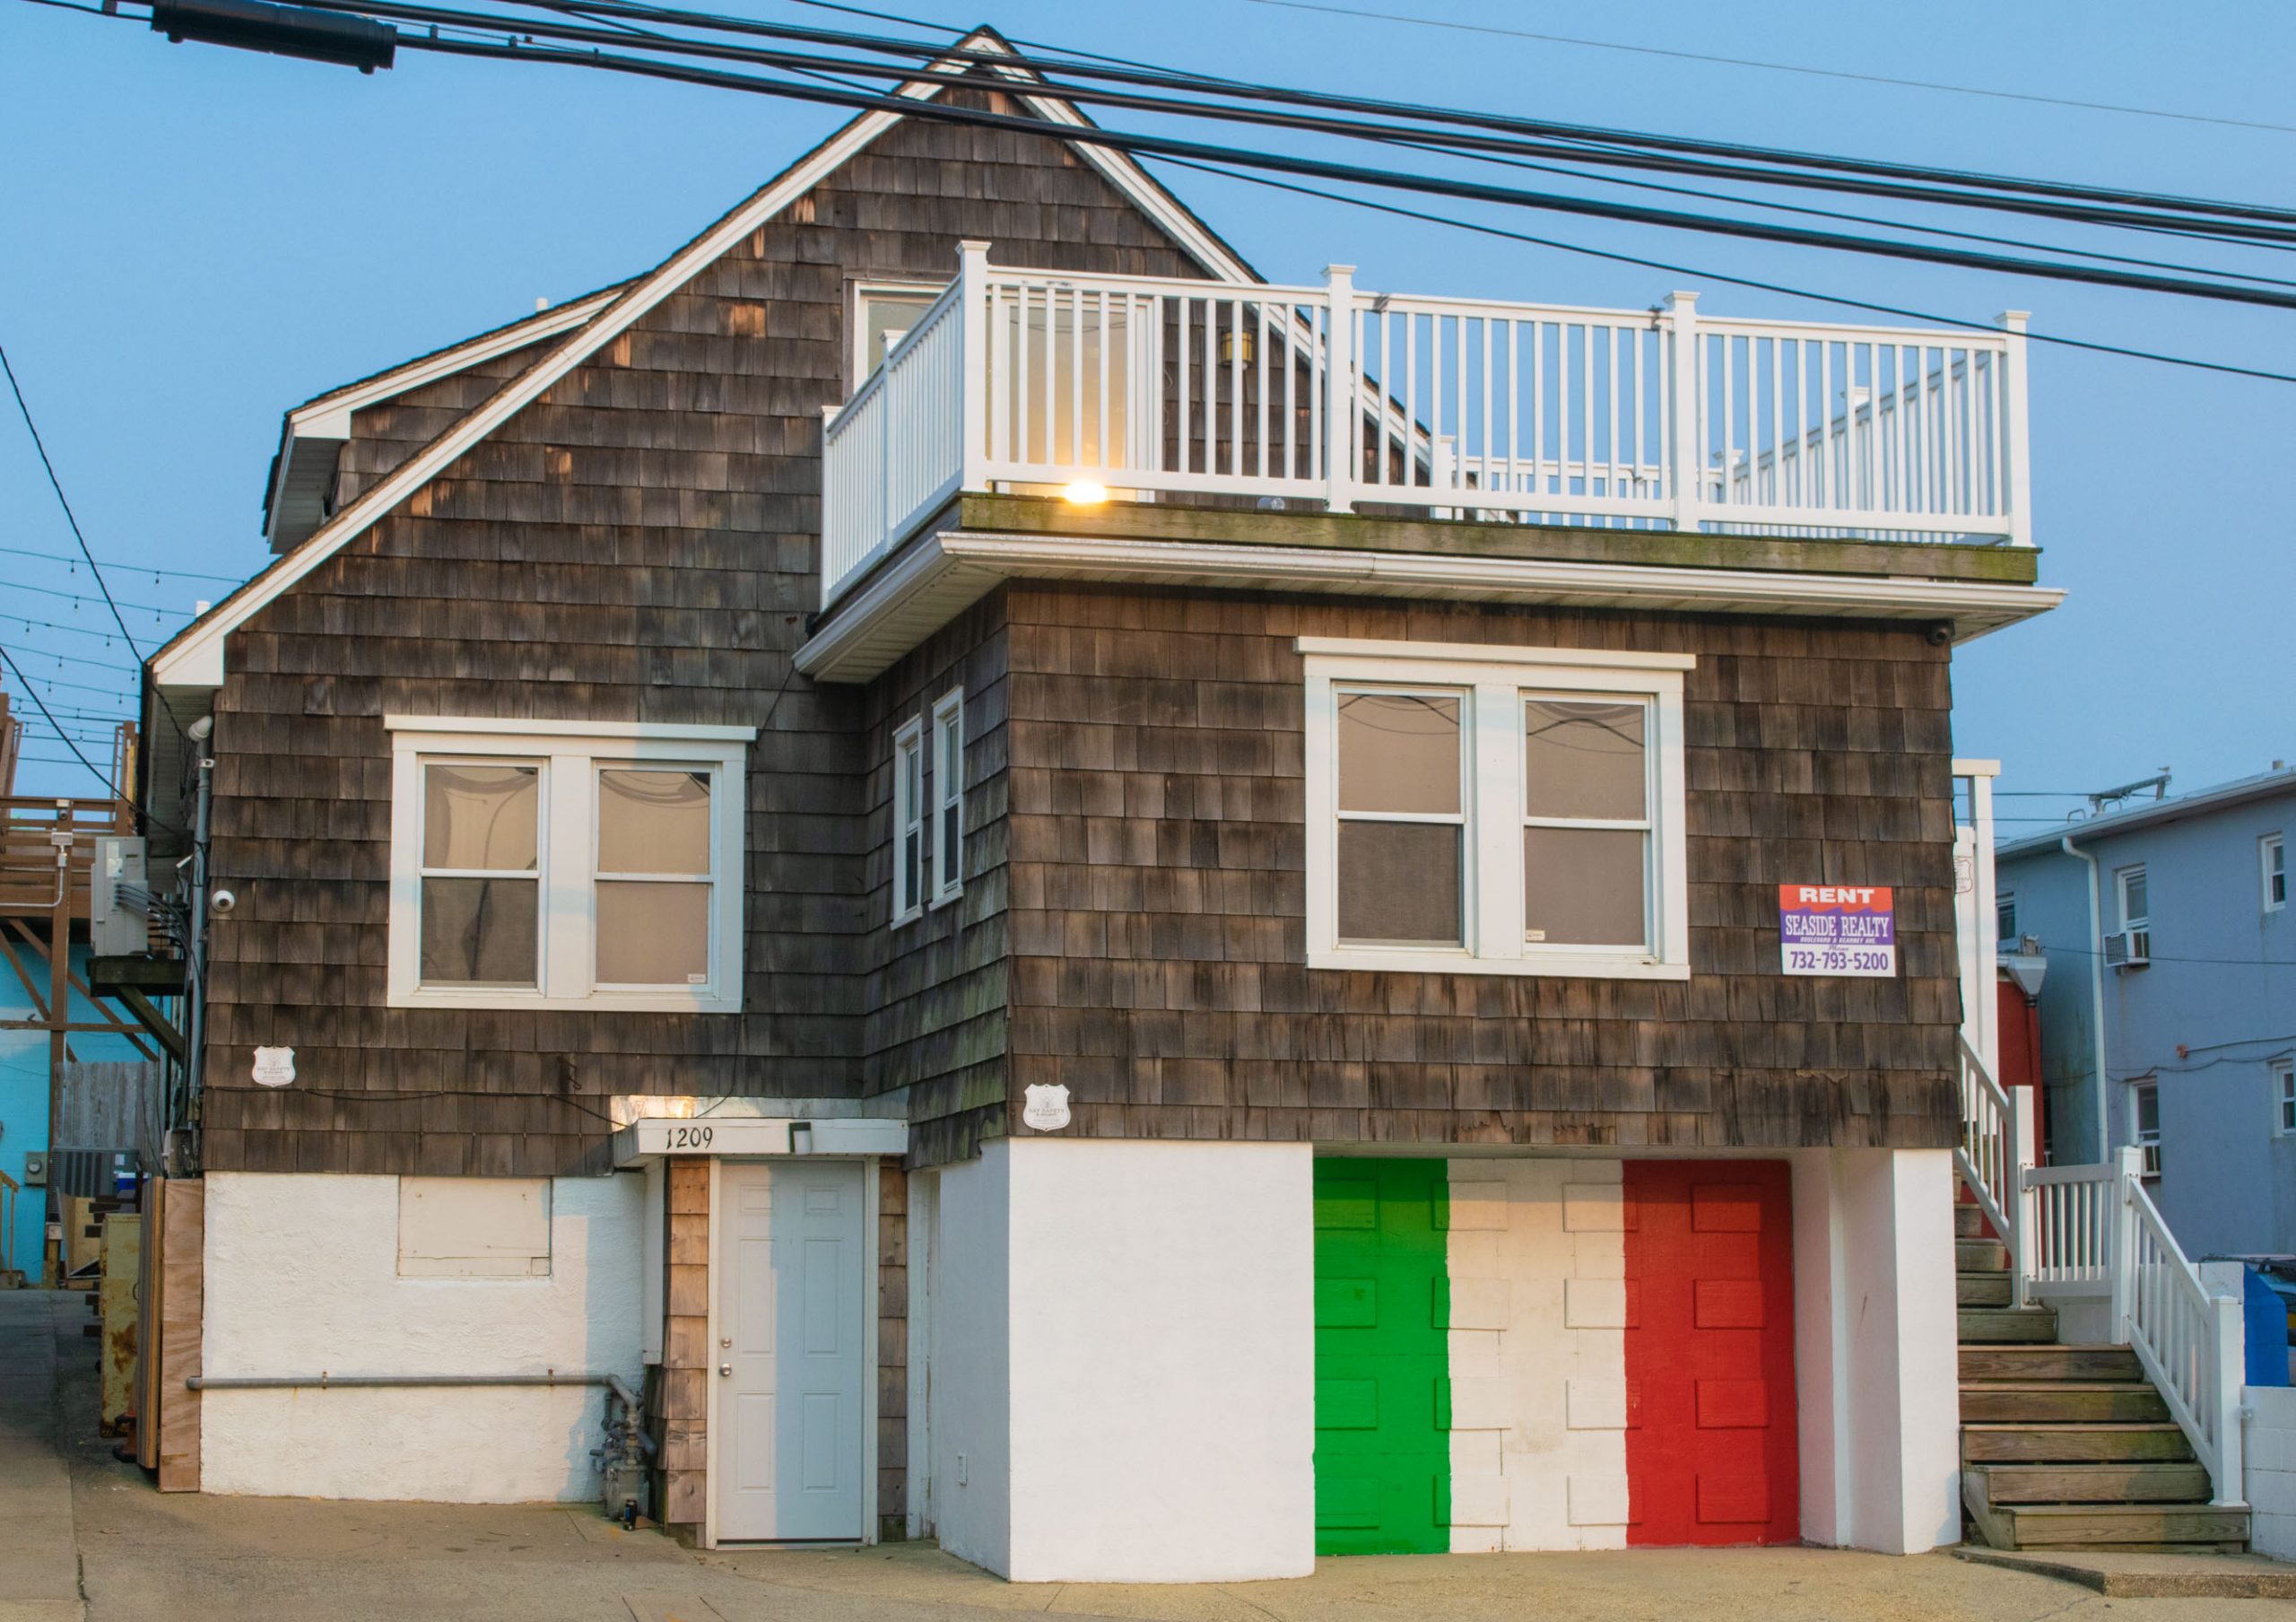 Rentals Banned at 'Jersey Shore House' and Owner Fined Over Nelk ...